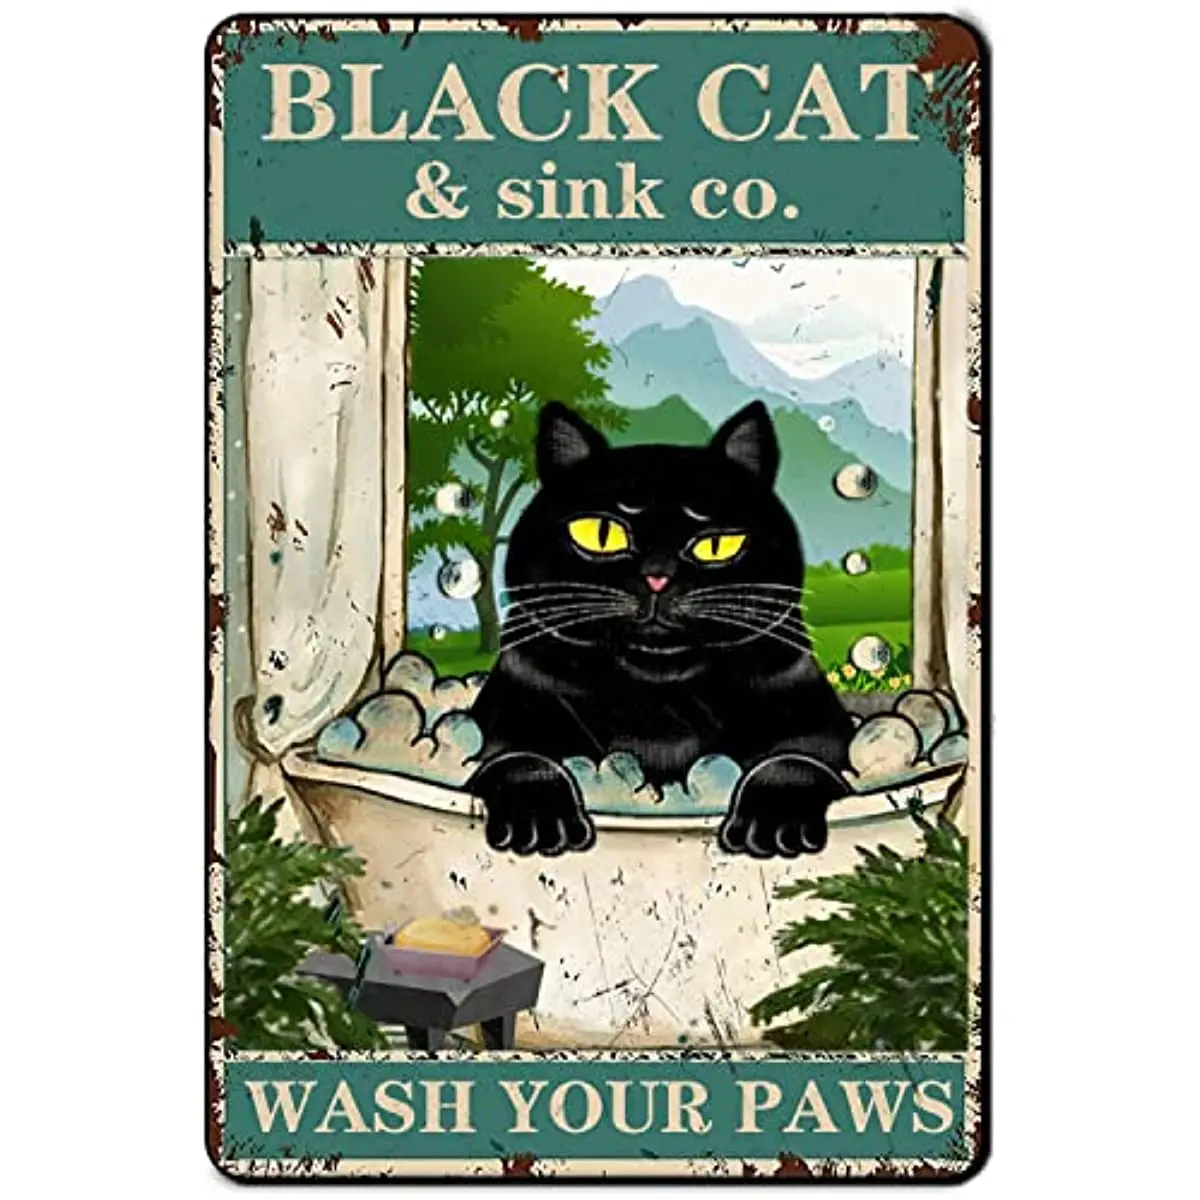 

Funny Bathroom Metal Tin Sign Vintage Black Cat Art Wall Decor Quote Wash Your Paws Signs For Farmhouse Home Kitchen Office